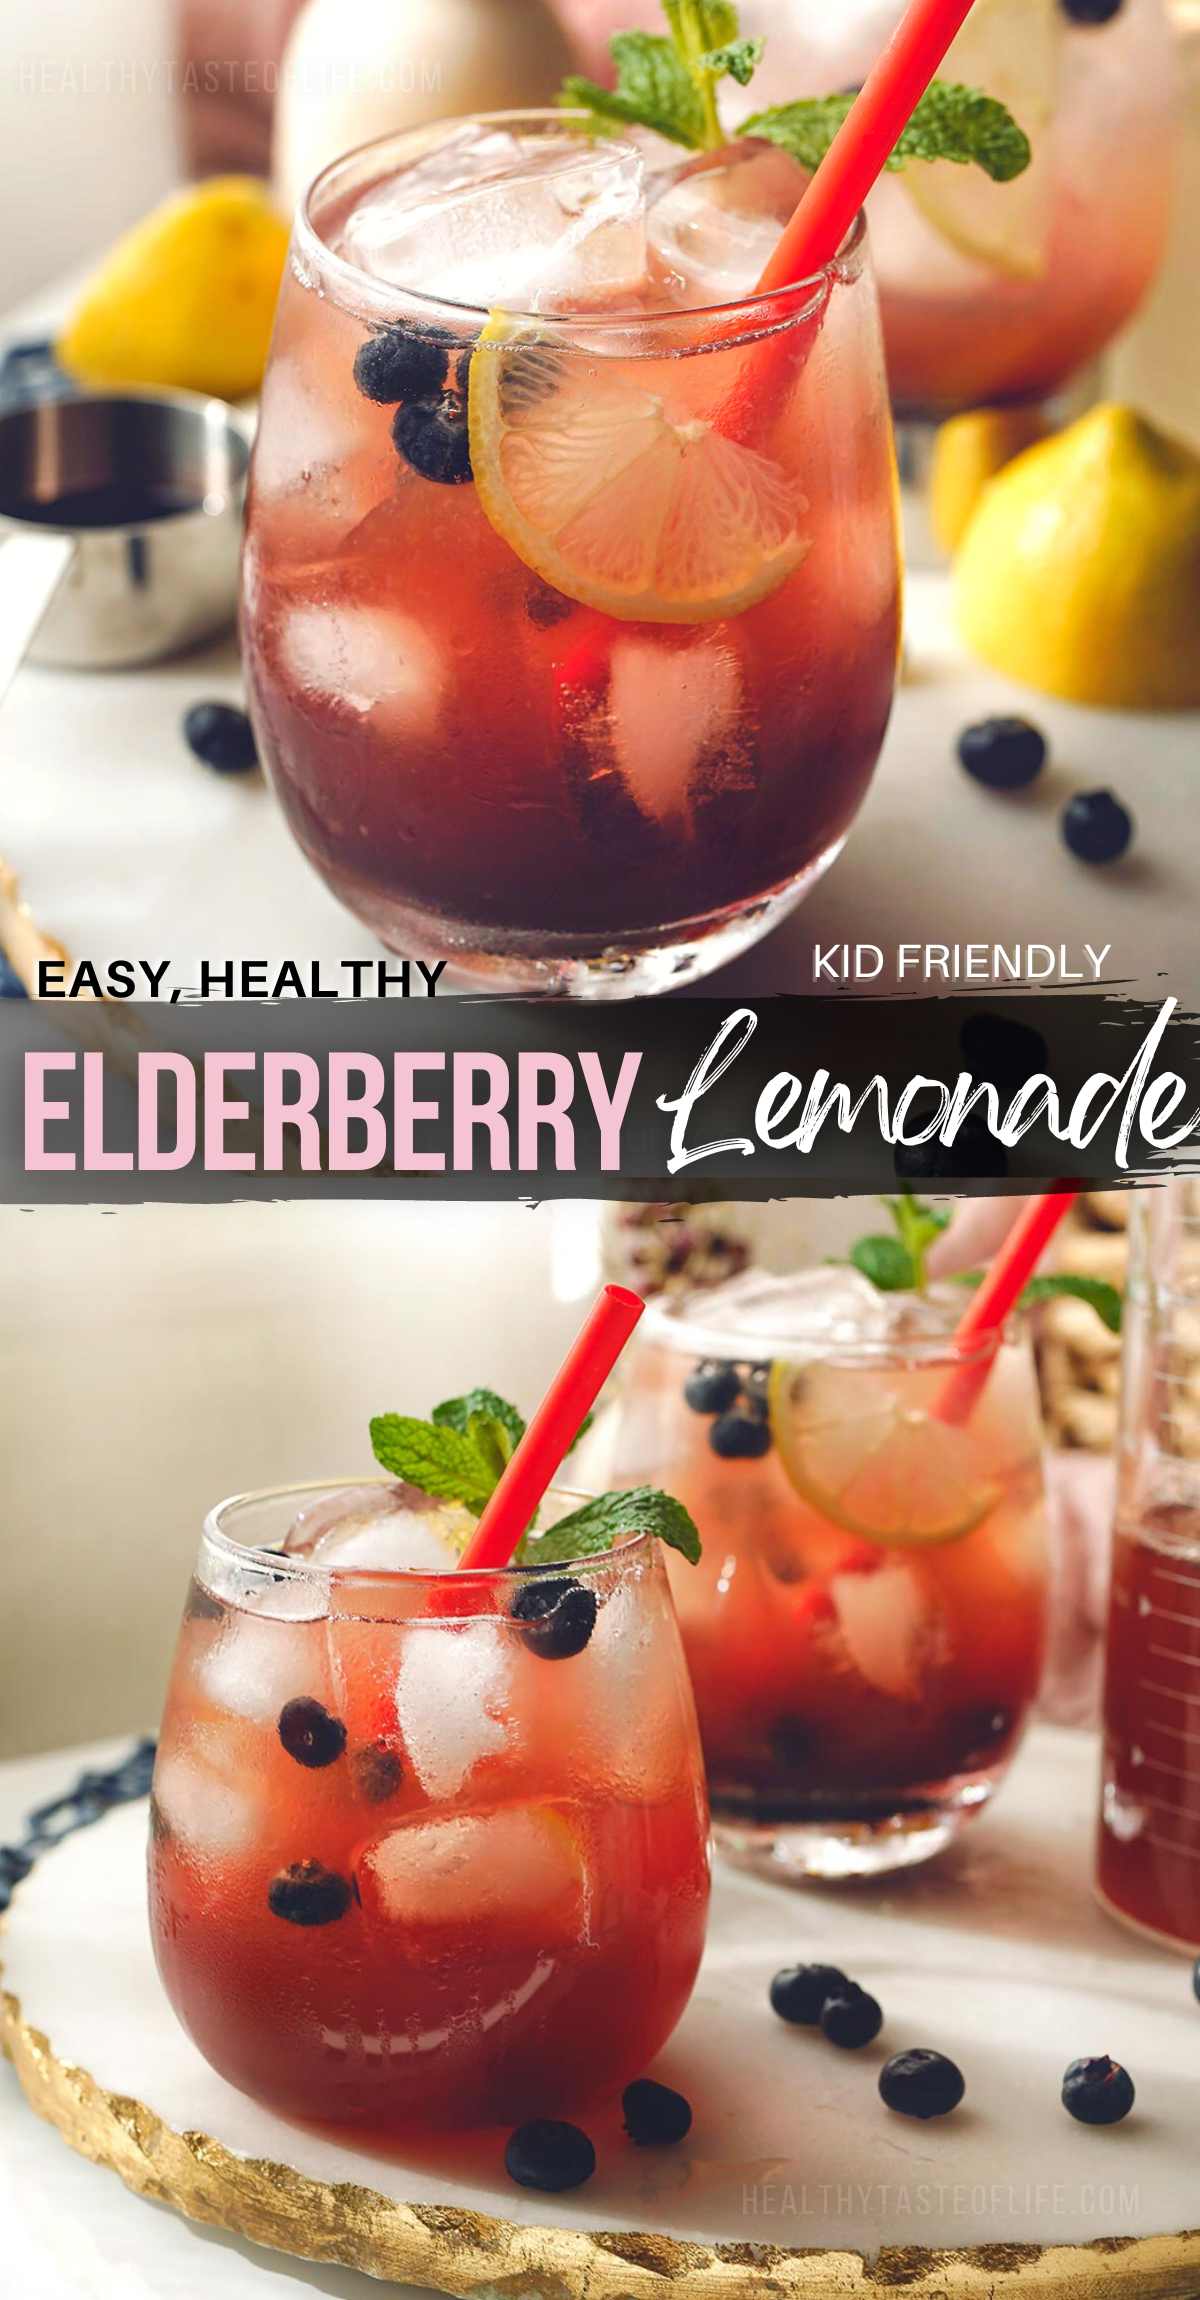 Unlock the refreshing taste of summer with this homemade Elderberry Lemonade! This elderberry drink is bursting with a unique sweet-tart flavor, the perfect balance of fruity elderberries and zesty lemons. Add the elderberry syrup layer-by-layer or mix it all in for a full burst of flavor. Try the elderberry lemonade recipe now and taste the difference! #ElderberryLemonade #SummerDrinks #HomemadeLemonade #RefreshingRecipes #elderberryrecipe